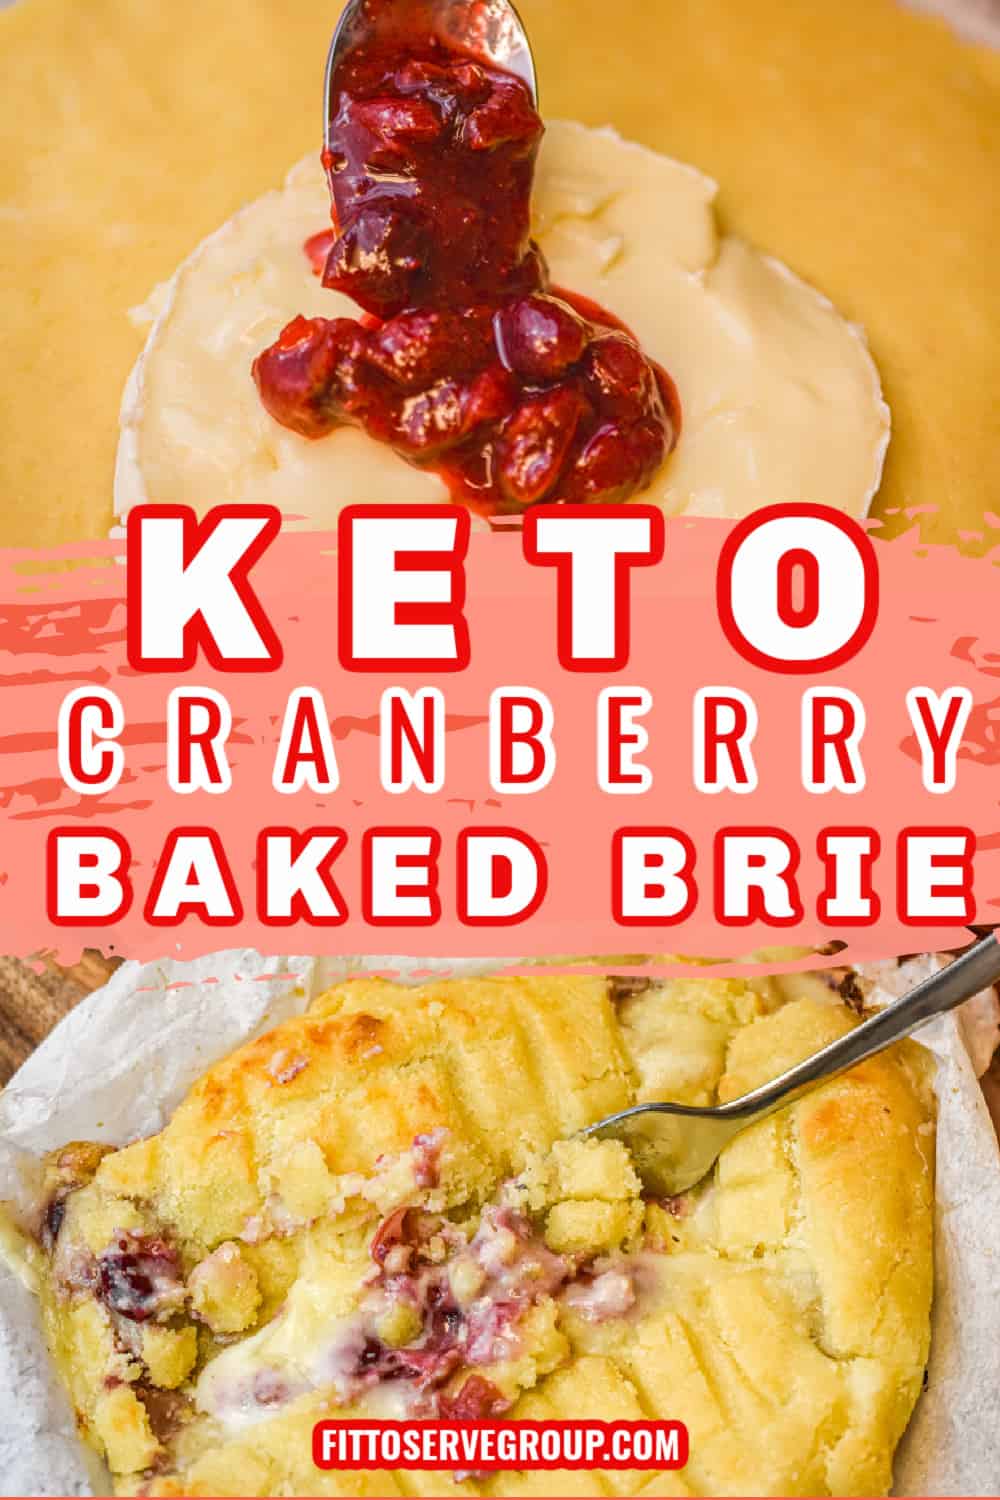 Keto Baked Brie wrapped in keto pastry dough and filled with sugar-free cranberry sauce